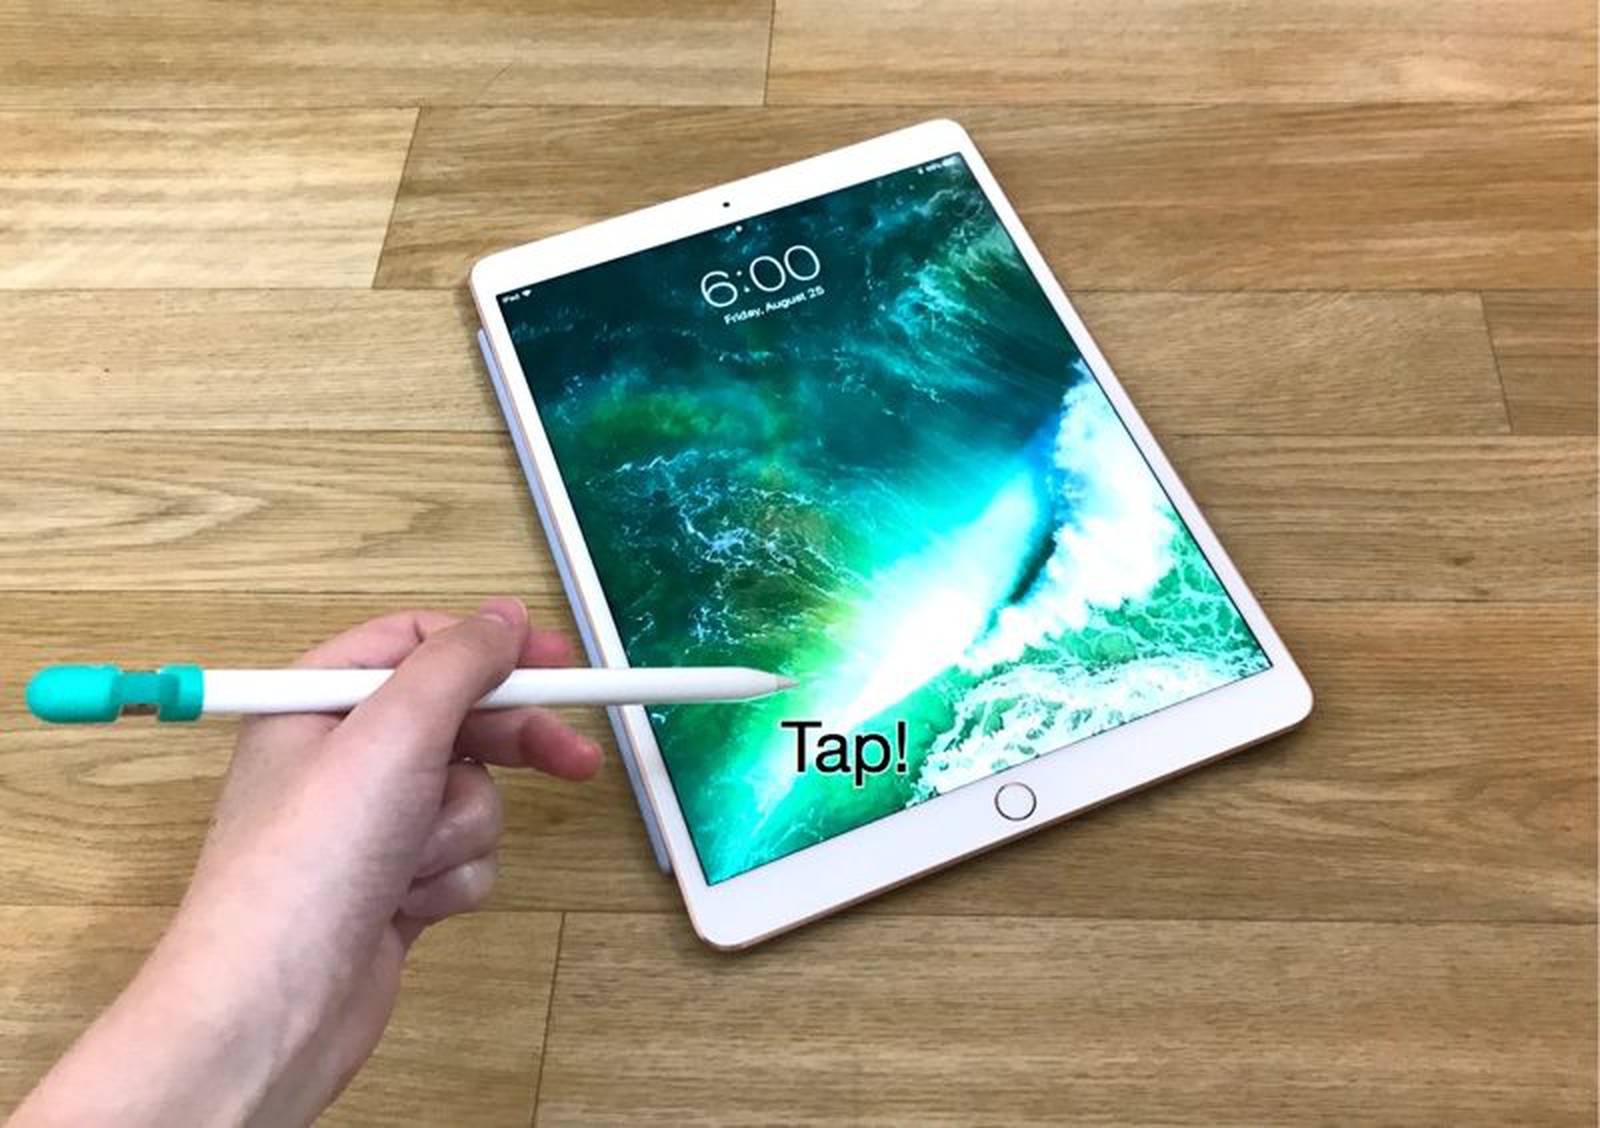 taking notes on ipad with apple pencil